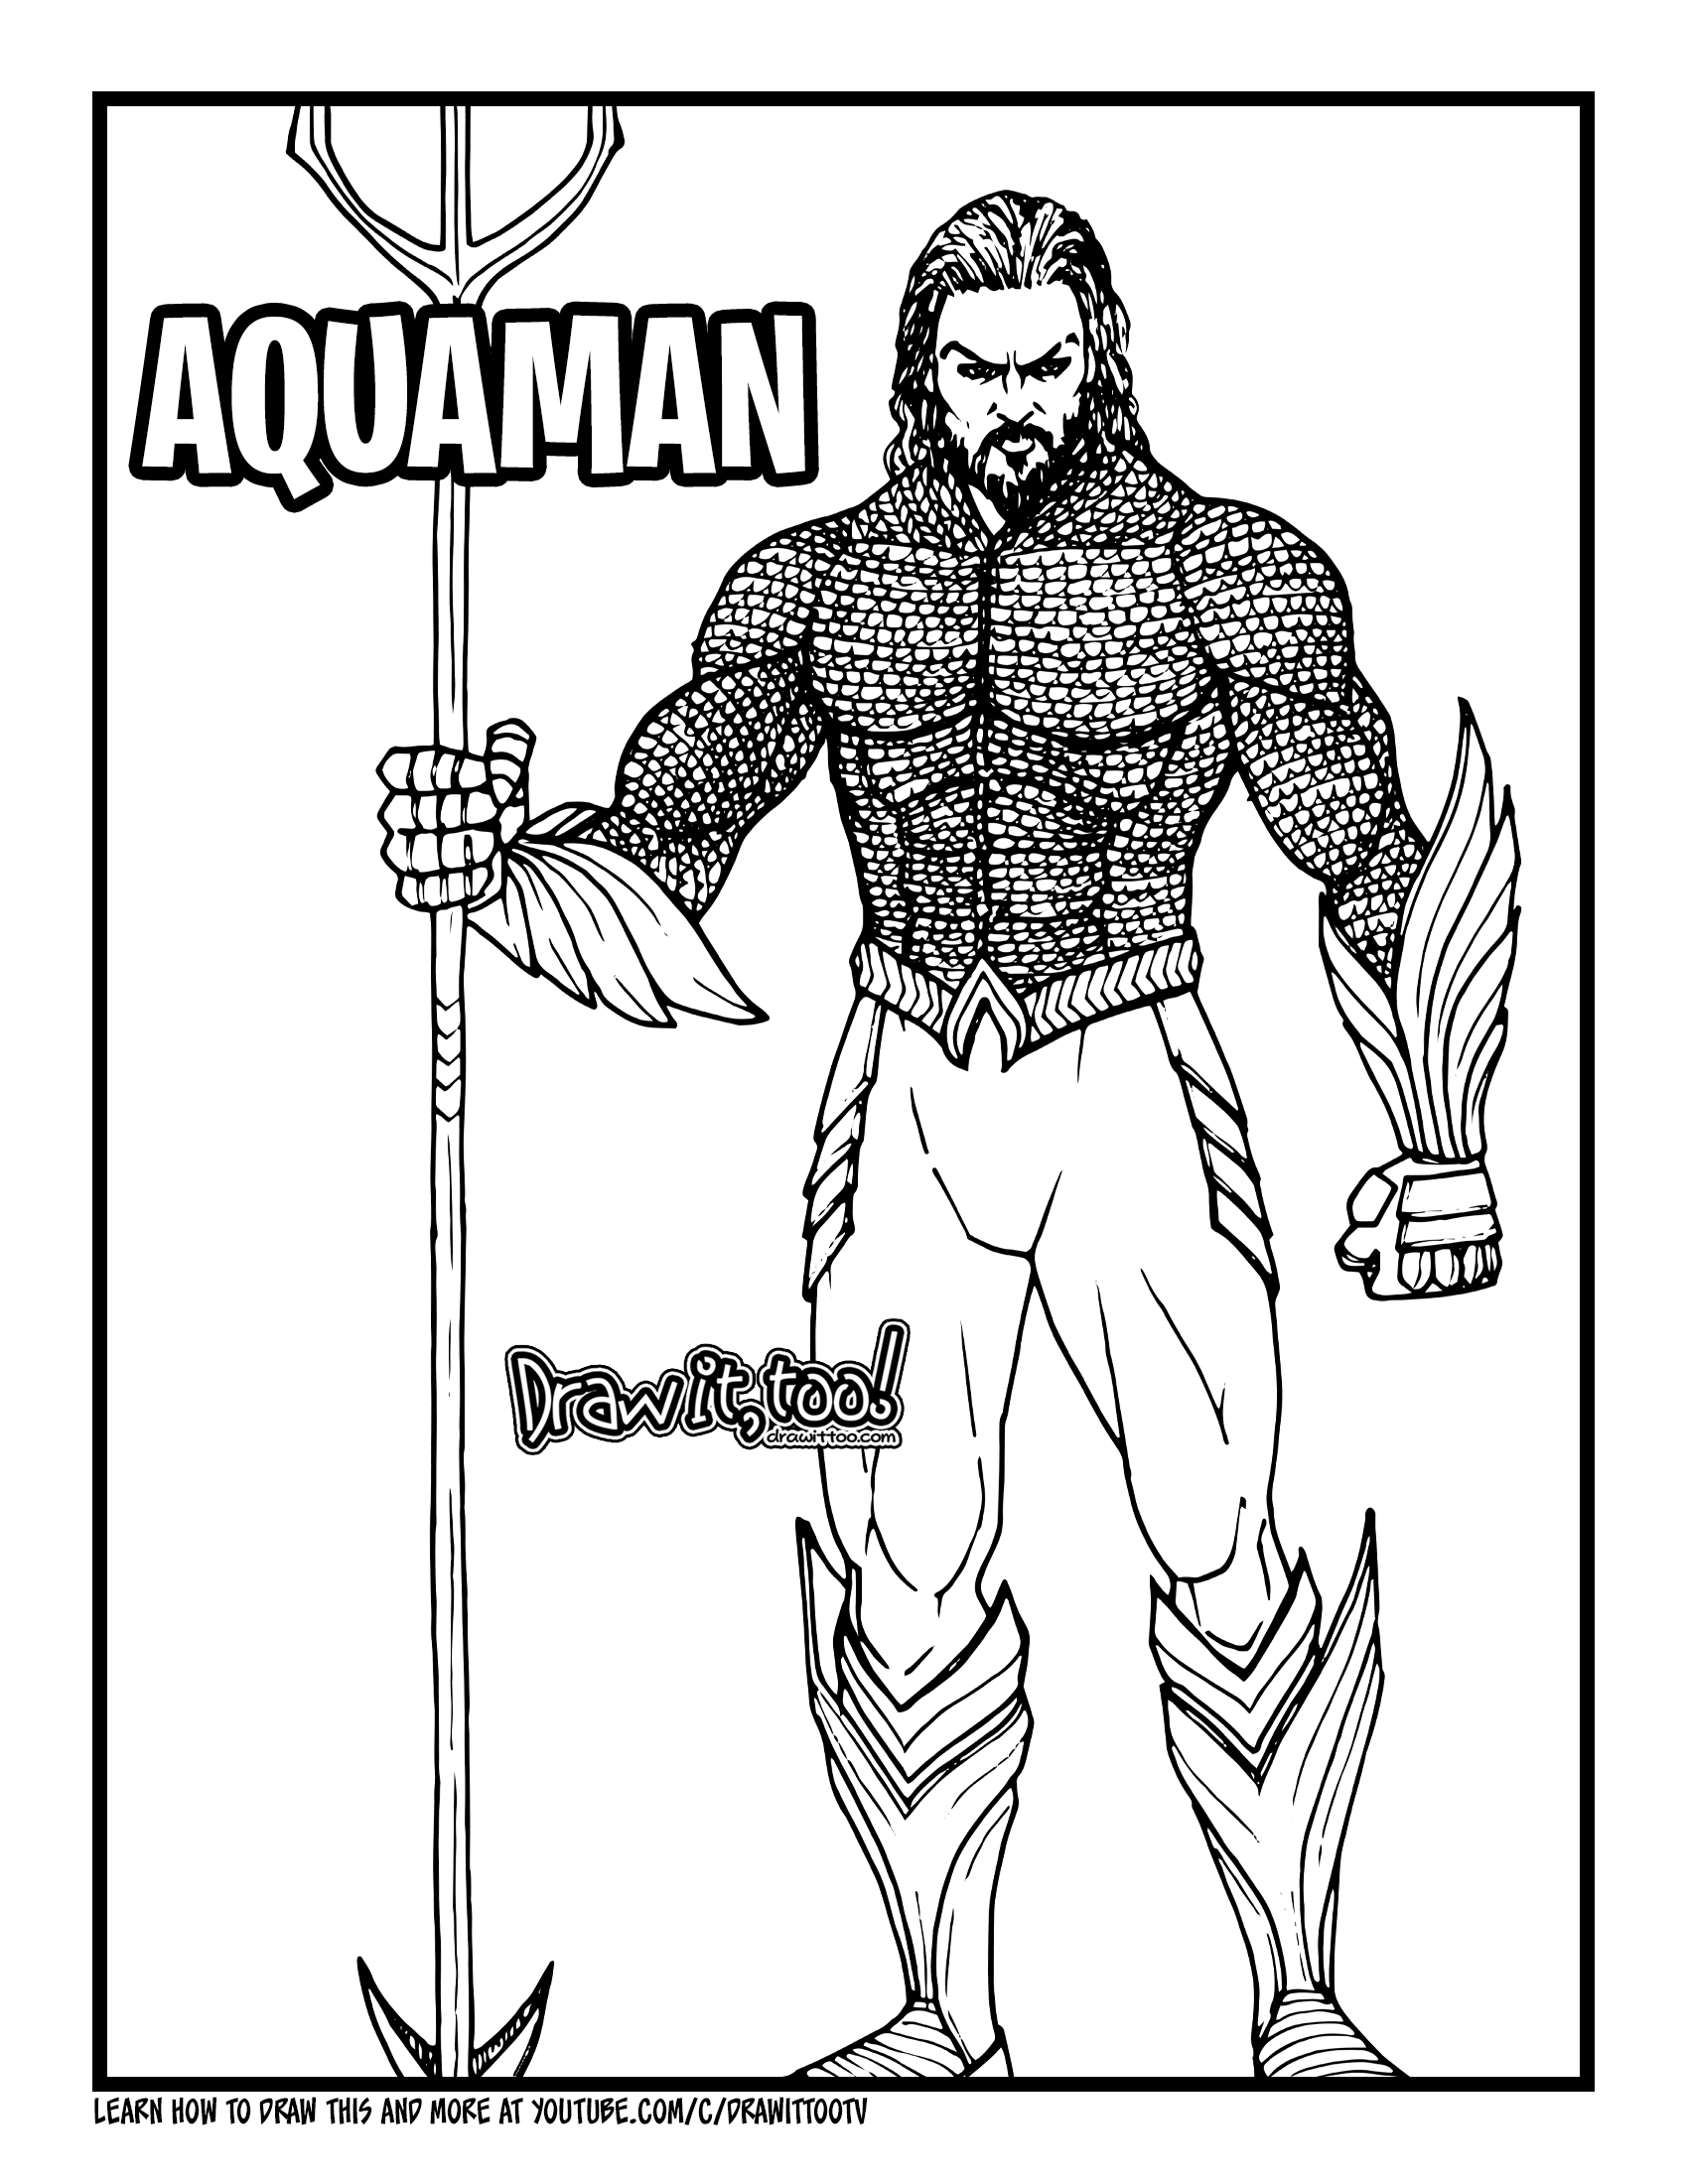 How to Draw AQUAMAN (2018 Movie) Drawing Tutorial | Draw it, Too!